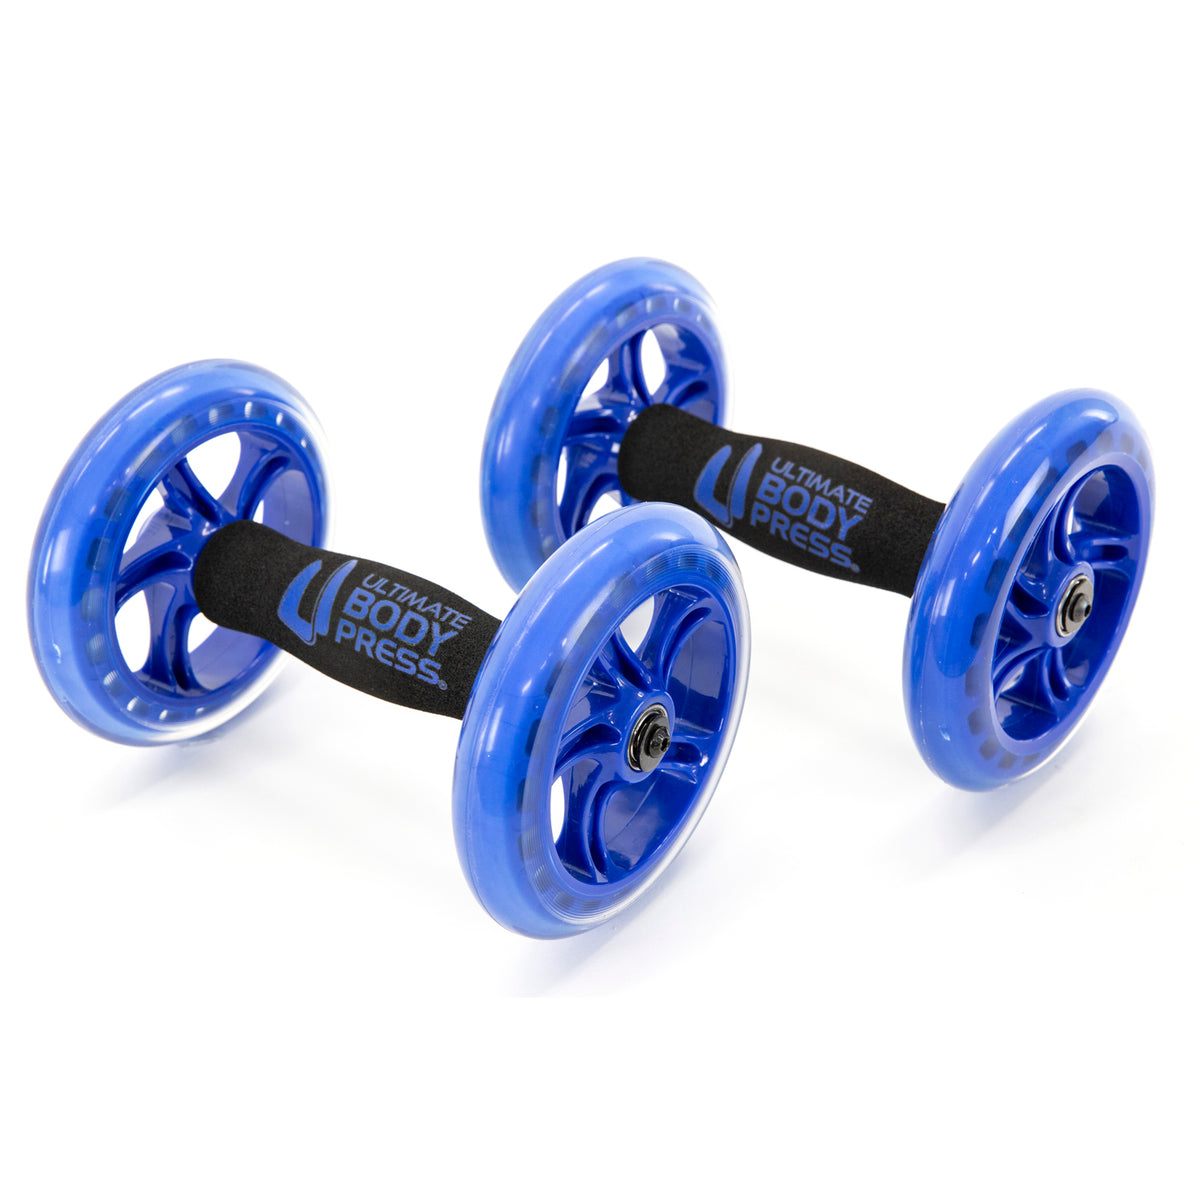  ABLE by Fitness Hardware - Multi-directional Ab Roller Wheel  And Push Up Bars/Handles for 20+ Ab and Core Workout Moves, 15+ Upper Body  Exercises (BLUE) - Sold as a Pair) 